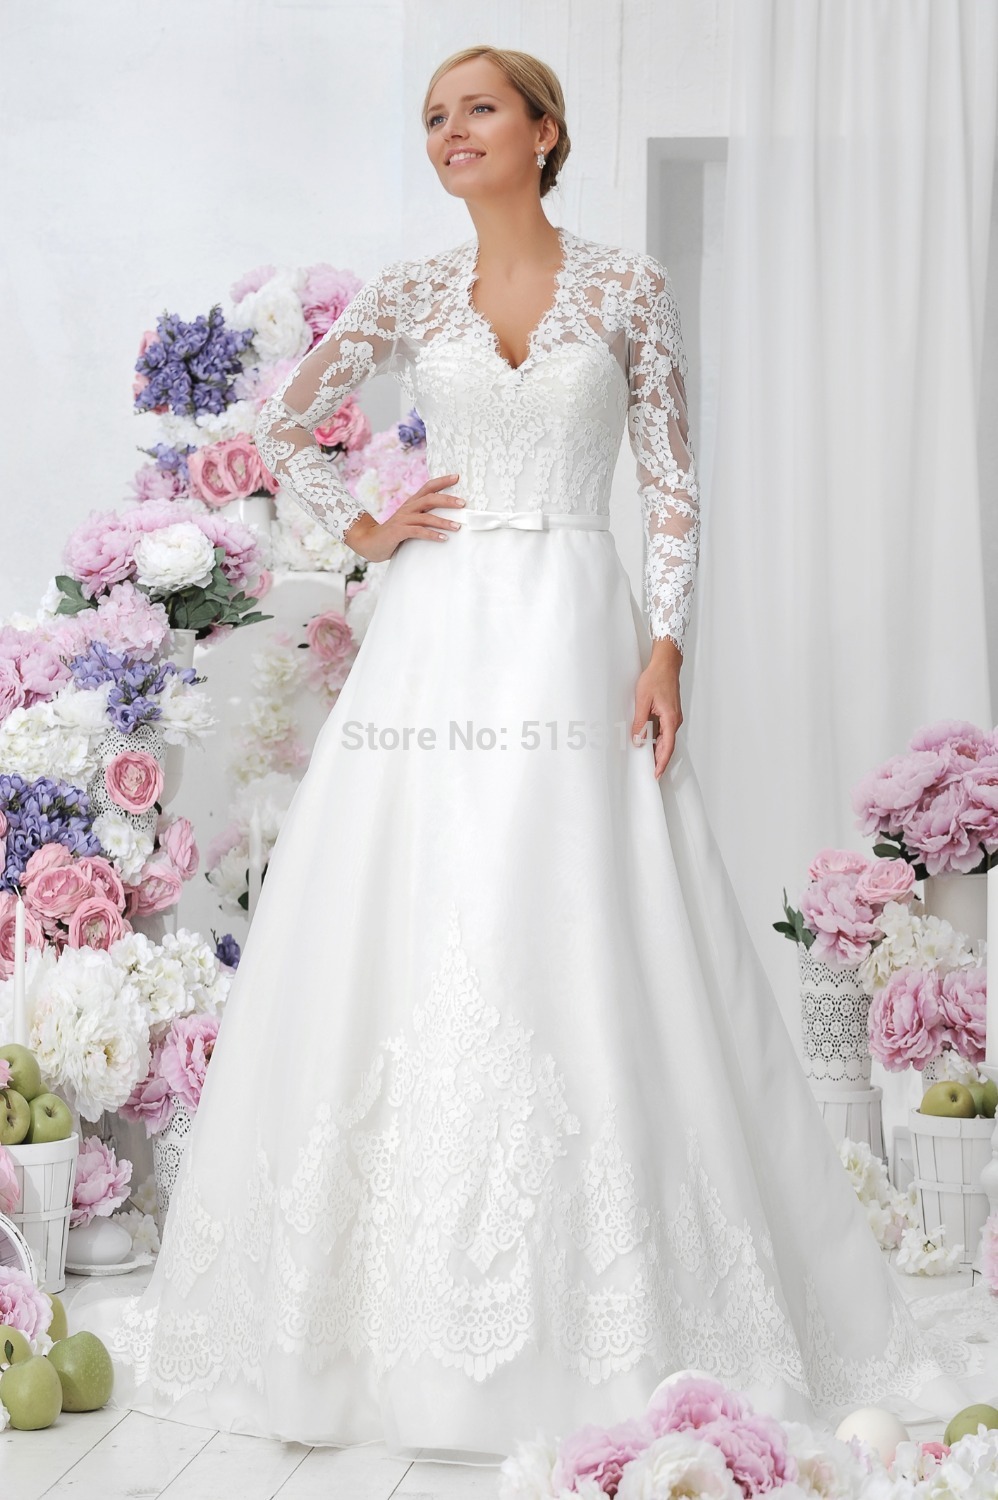 Customer Reviews Thousands Of Brides 28